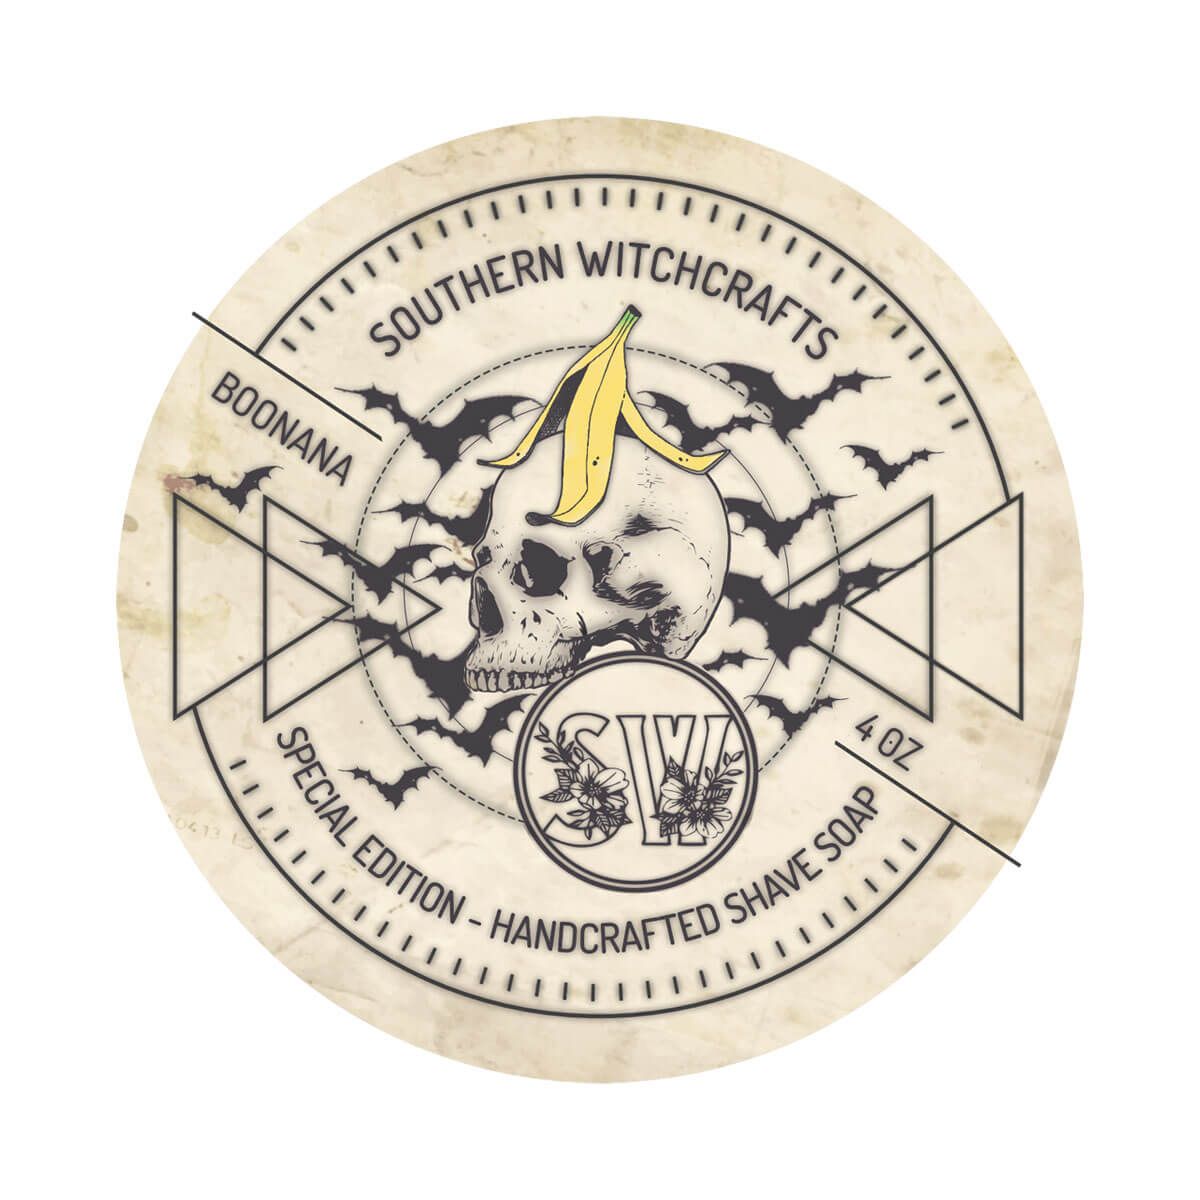 Southern Witchcrafts Boonana Shaving Soap